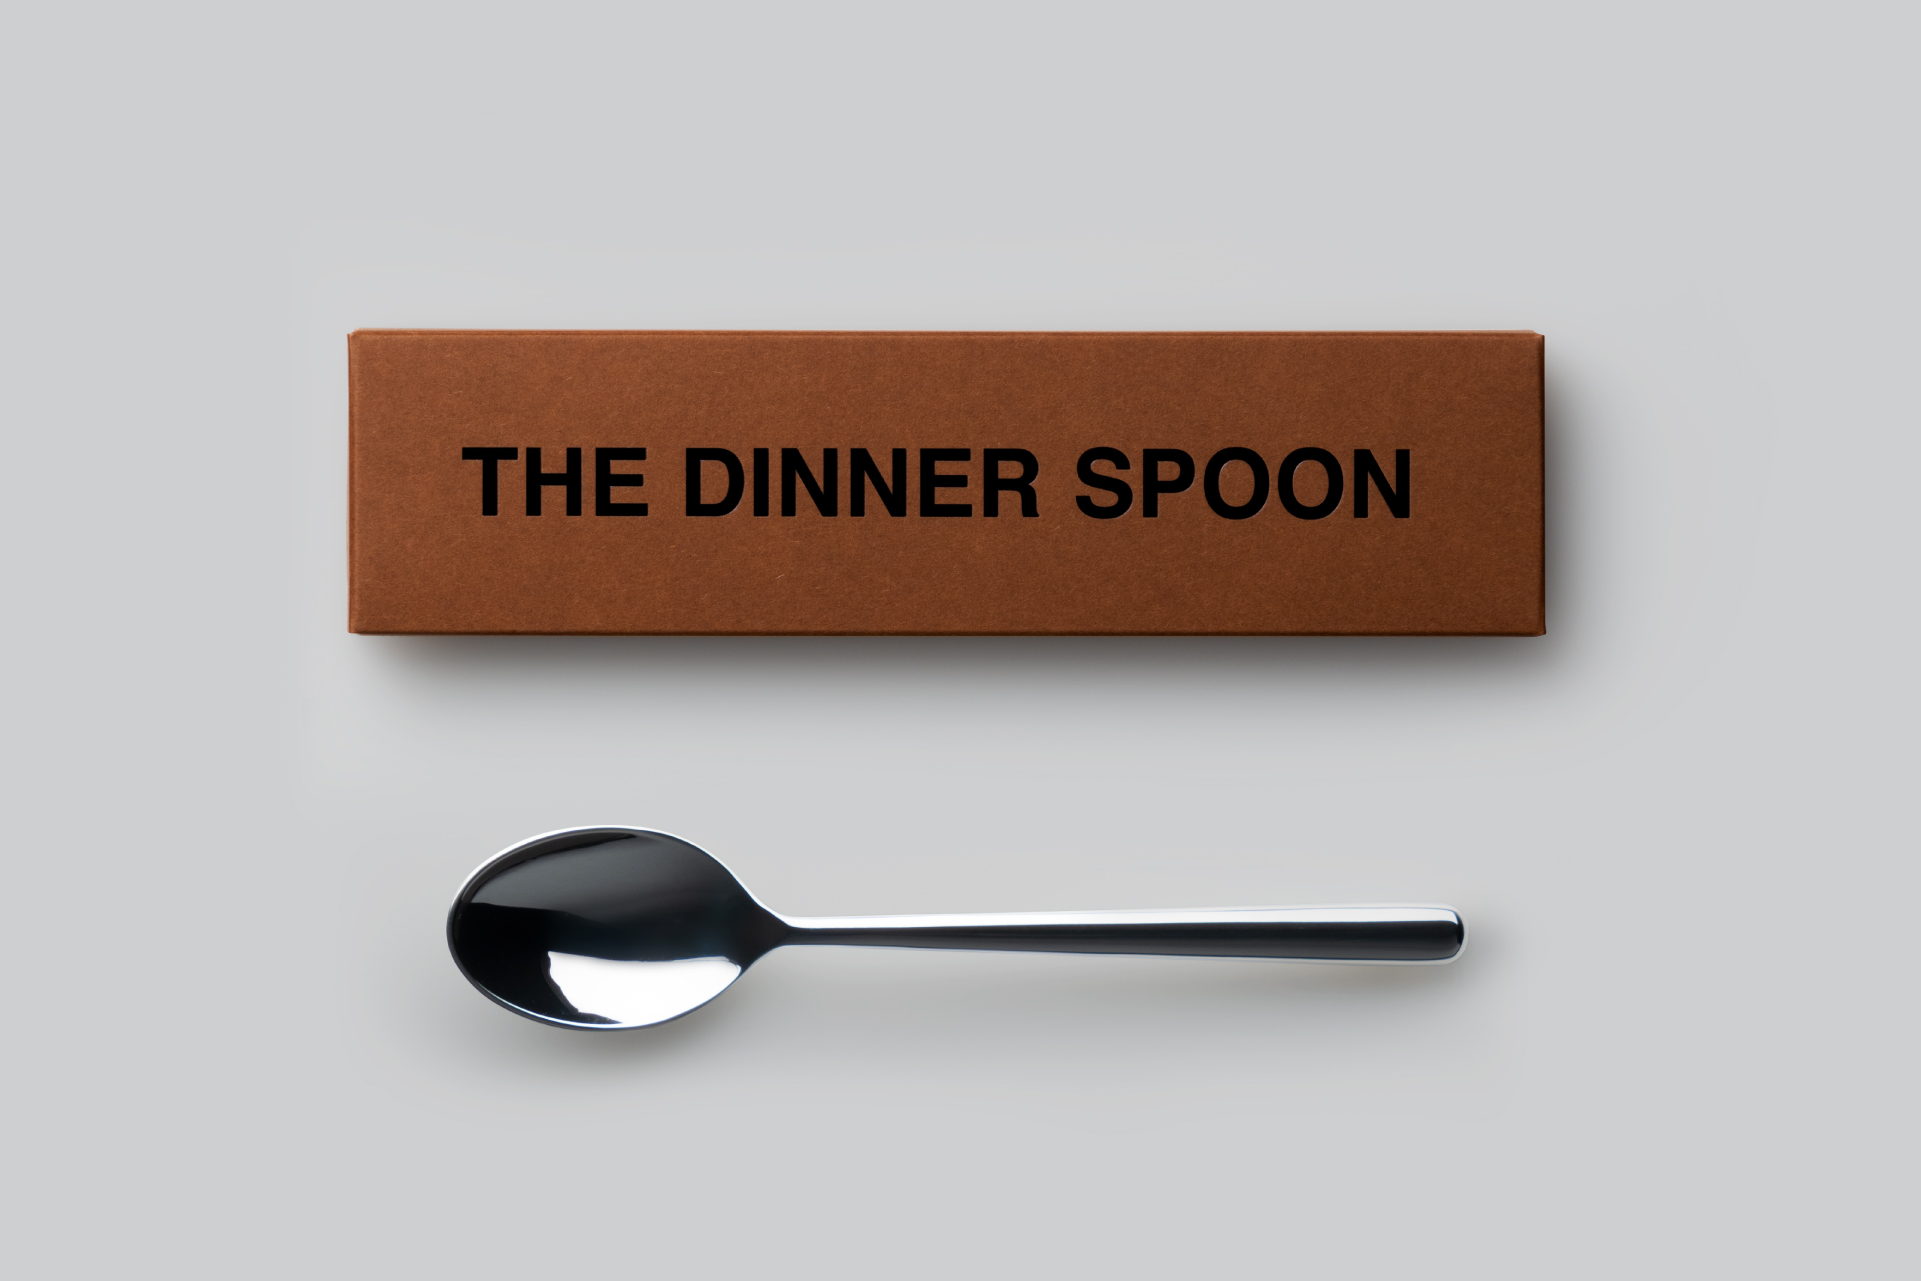 THE CUTLERY